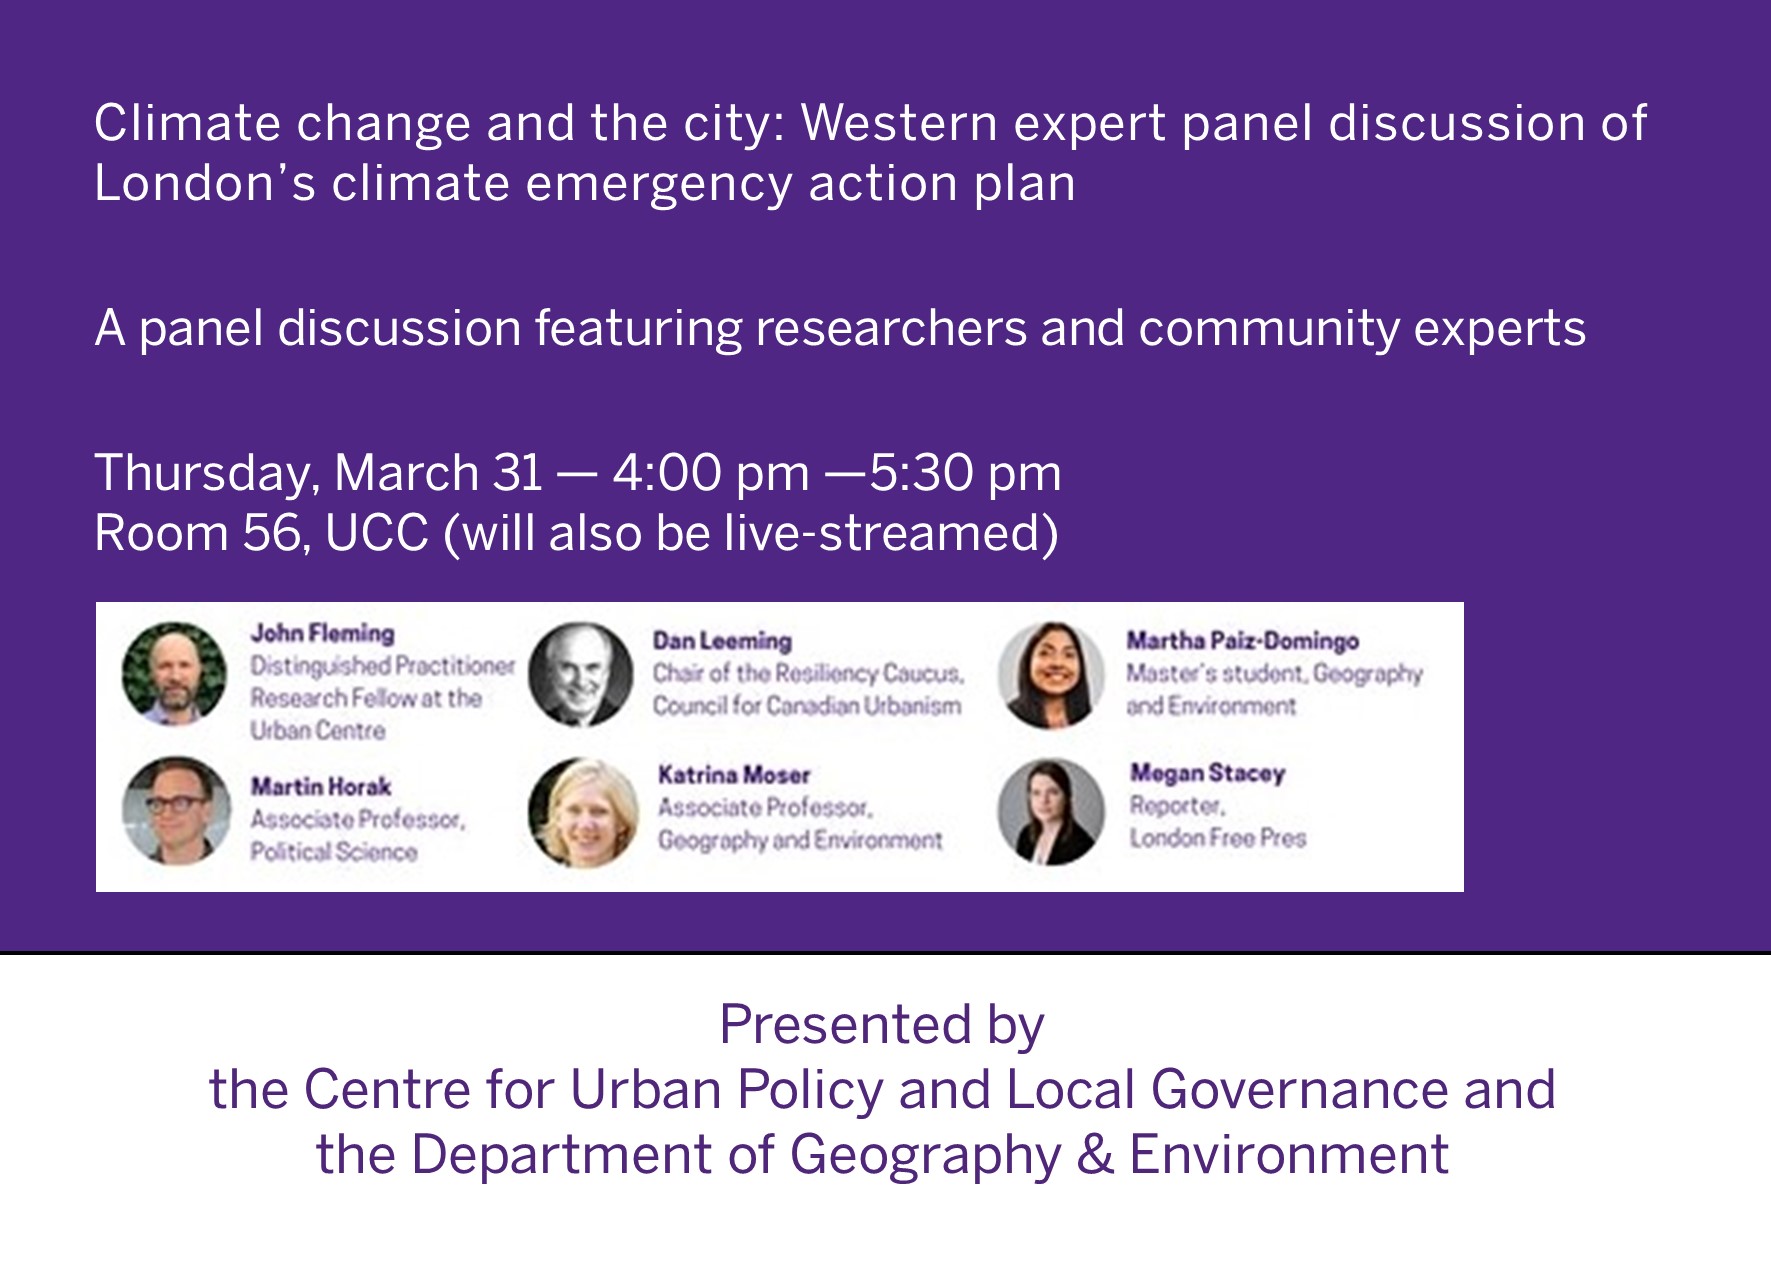 Climate change and the city: Western expert panel discussion of London’s climate emergency action plan